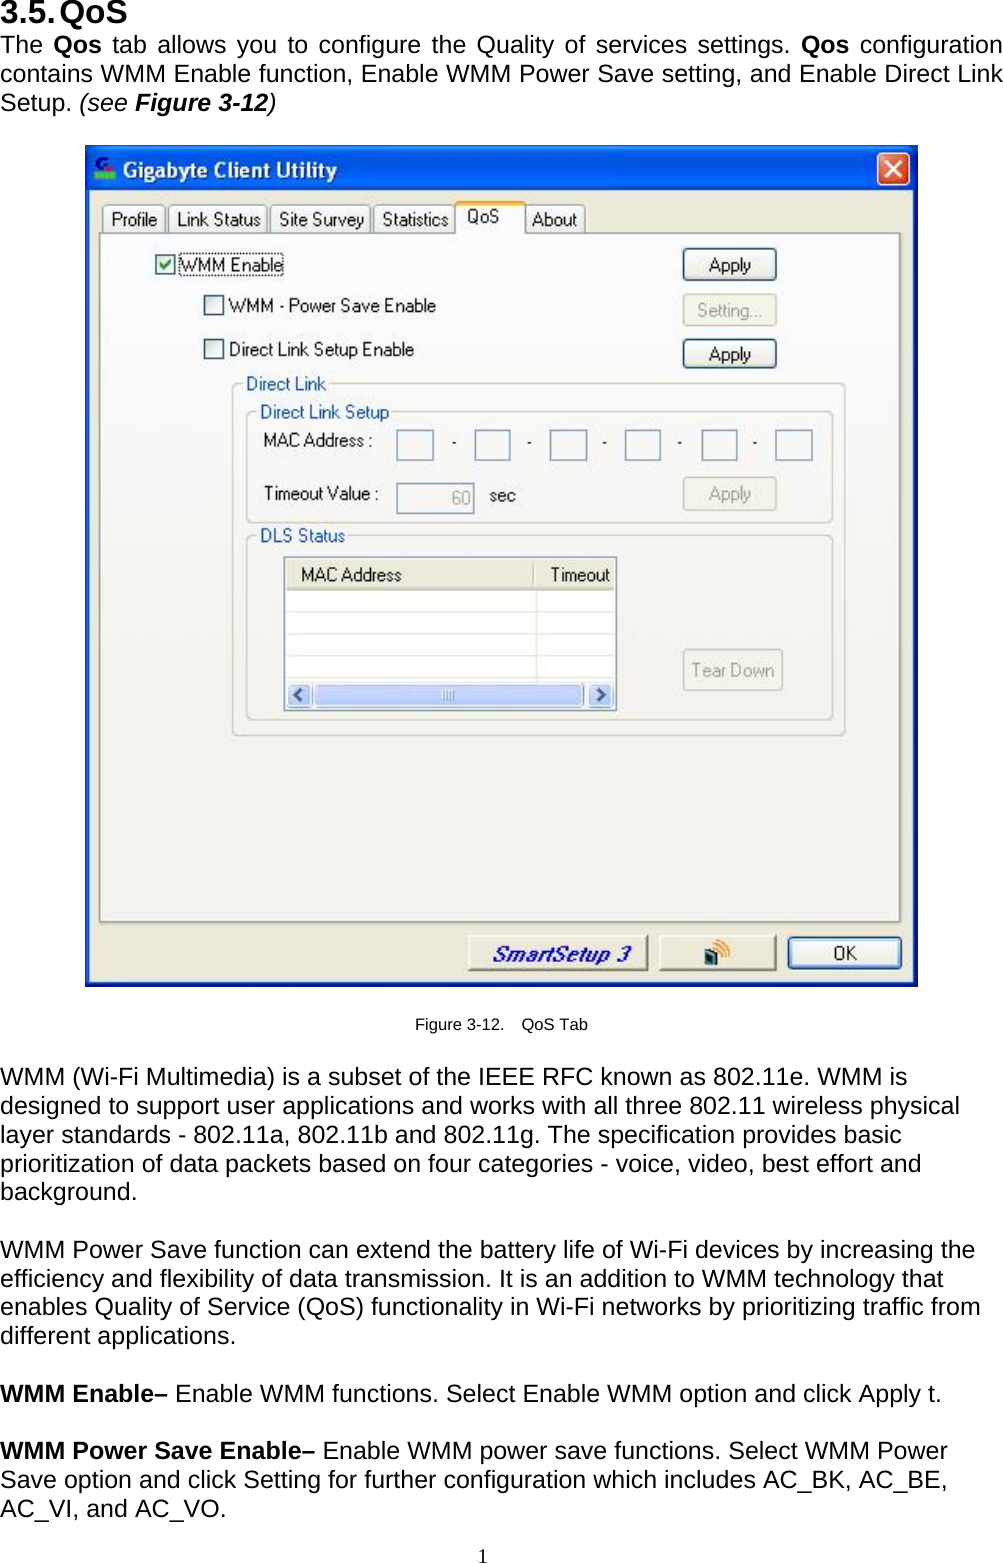 1   3.5. QoS The Qos tab allows you to configure the Quality of services settings. Qos configuration contains WMM Enable function, Enable WMM Power Save setting, and Enable Direct Link Setup. (see Figure 3-12)    Figure 3-12.  QoS Tab  WMM (Wi-Fi Multimedia) is a subset of the IEEE RFC known as 802.11e. WMM is designed to support user applications and works with all three 802.11 wireless physical layer standards - 802.11a, 802.11b and 802.11g. The specification provides basic prioritization of data packets based on four categories - voice, video, best effort and background.   WMM Power Save function can extend the battery life of Wi-Fi devices by increasing the efficiency and flexibility of data transmission. It is an addition to WMM technology that enables Quality of Service (QoS) functionality in Wi-Fi networks by prioritizing traffic from different applications.  WMM Enable– Enable WMM functions. Select Enable WMM option and click Apply t.  WMM Power Save Enable– Enable WMM power save functions. Select WMM Power Save option and click Setting for further configuration which includes AC_BK, AC_BE, AC_VI, and AC_VO.   